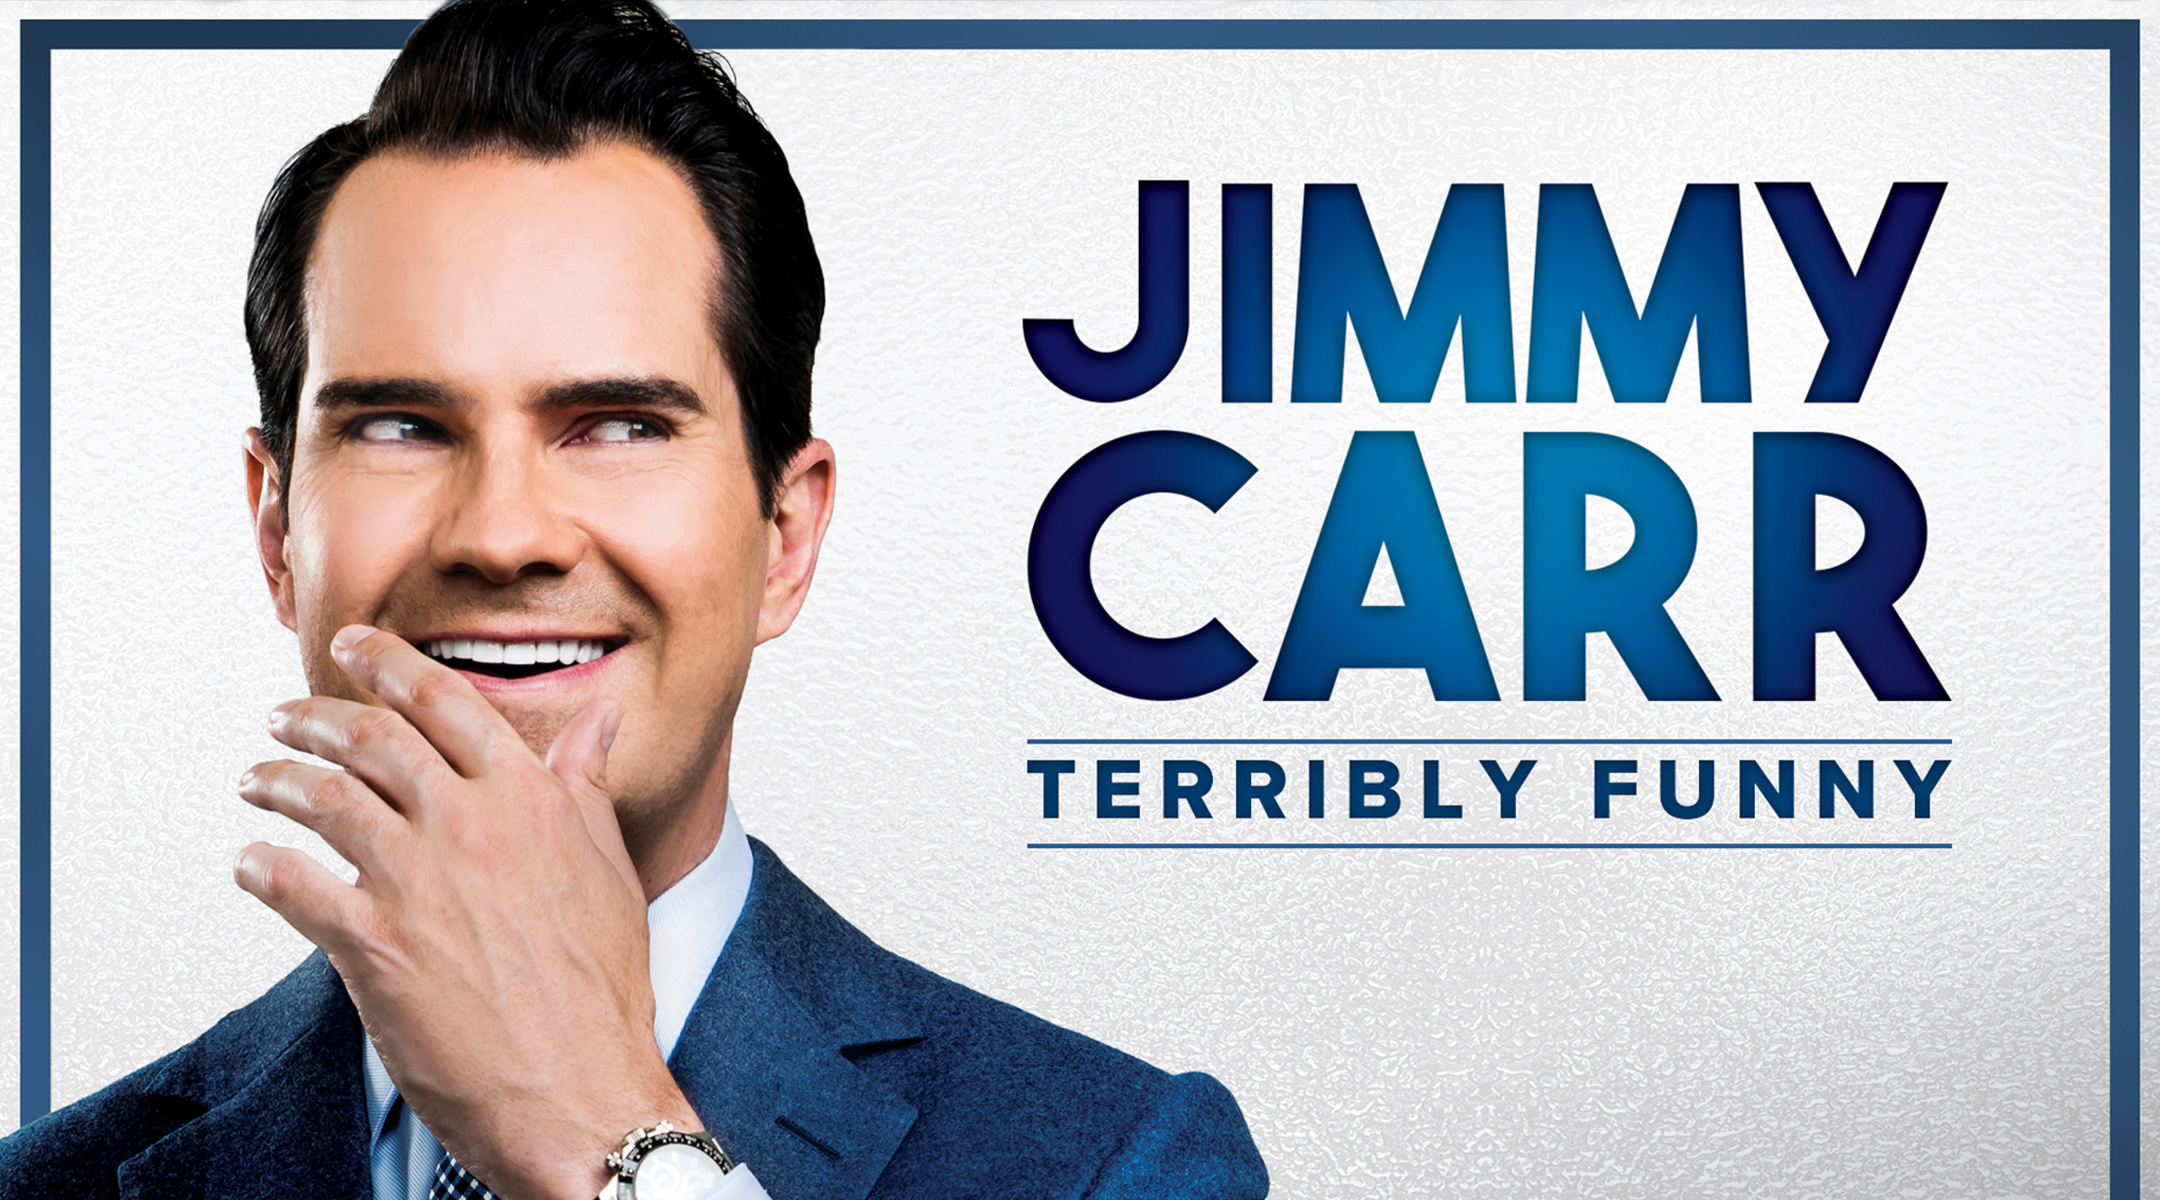 Jimmy Carr: Terribly Funny 2.0 - Chesterfield Early Show